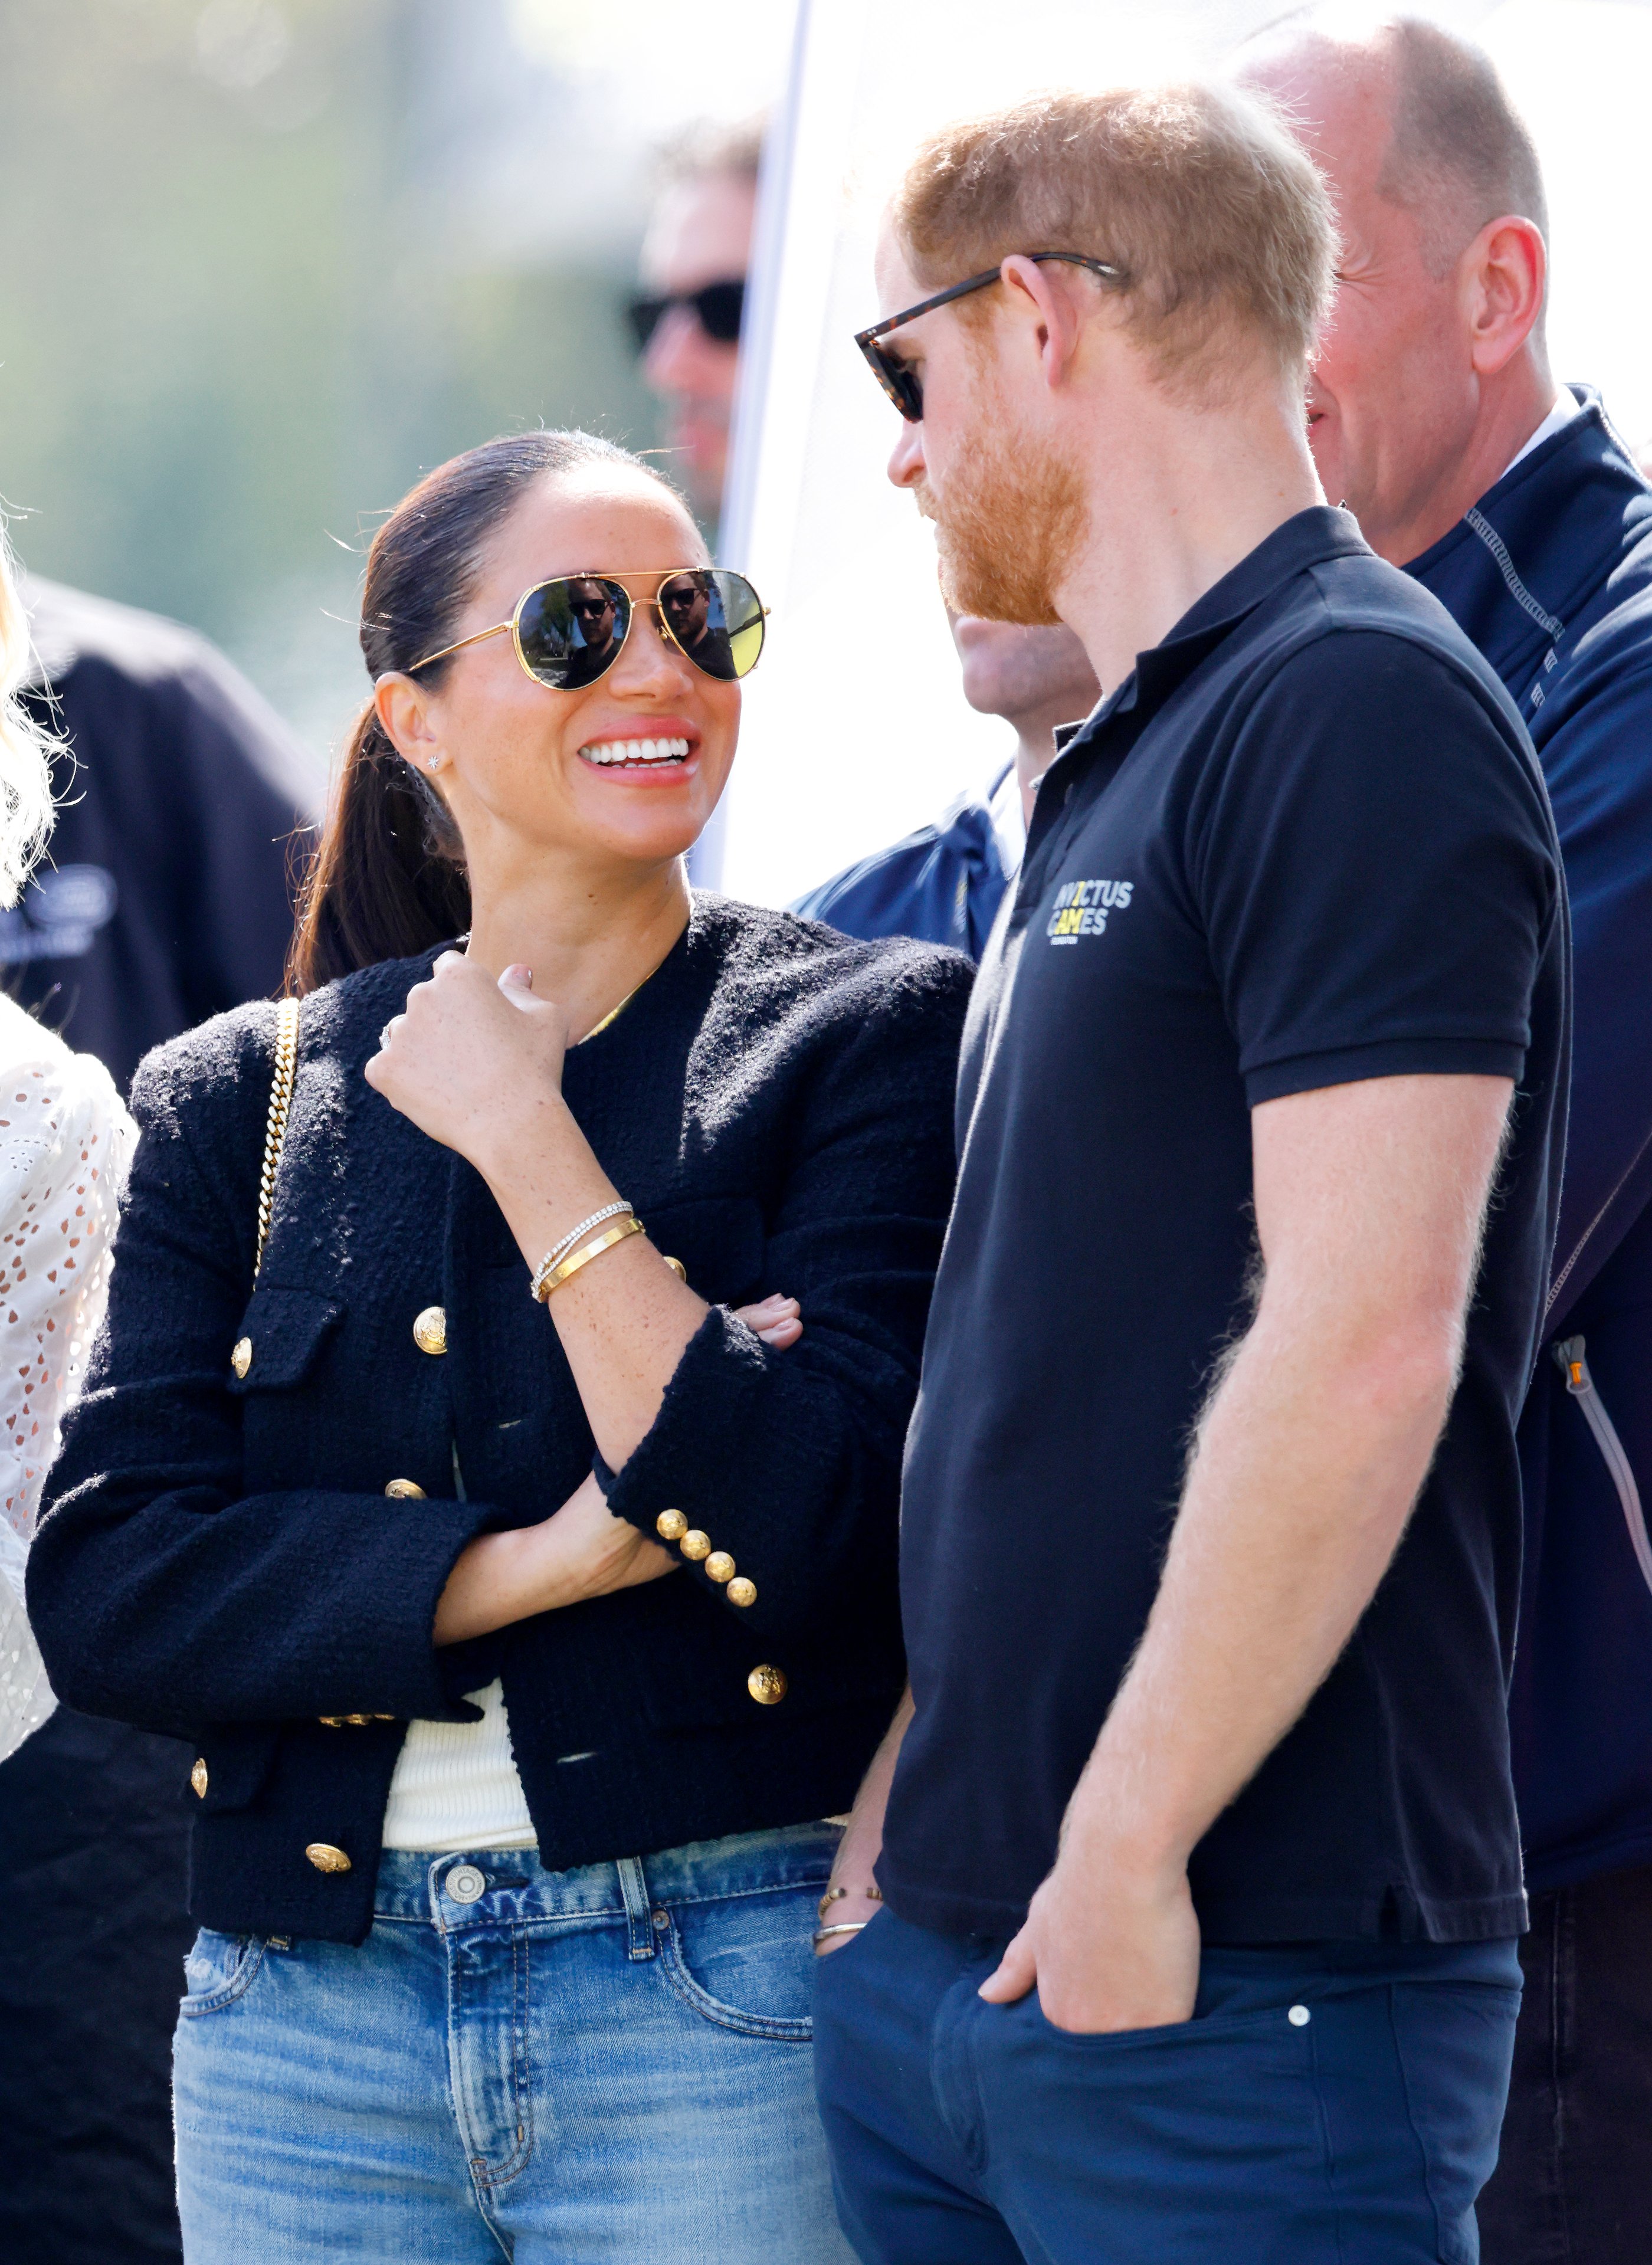 Meghan Markle and Prince Harry watch the Land Rover Driving Challenge, on day 1 of the Invictus Games 2020 at Zuiderpark on April 16, 2022 in The Hague, Netherlands ┃Source: Getty Images